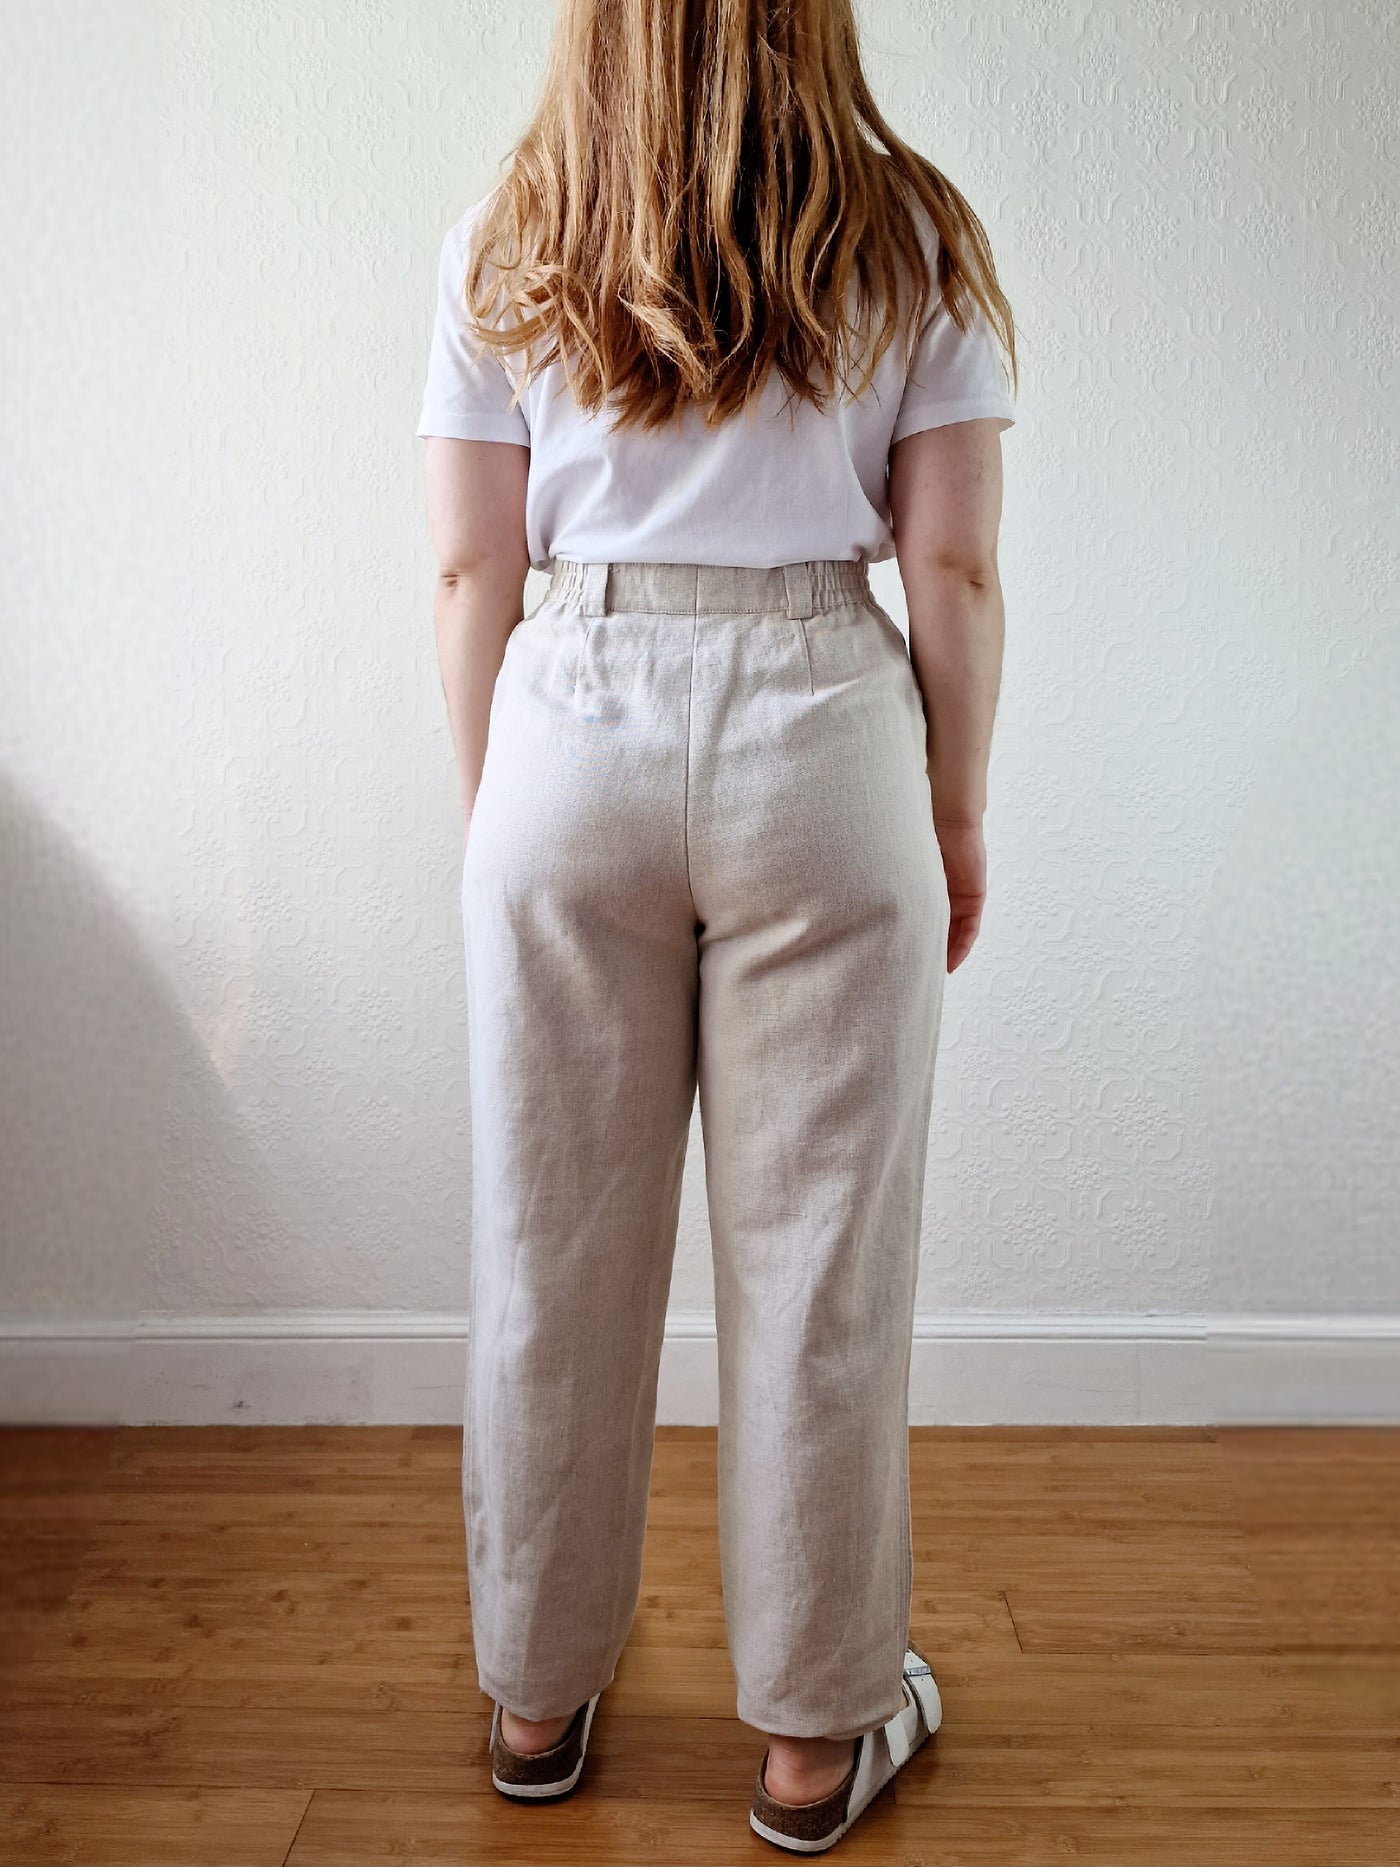 Vintage Oatmeal High Waisted Linen Trousers with Embroidery - S